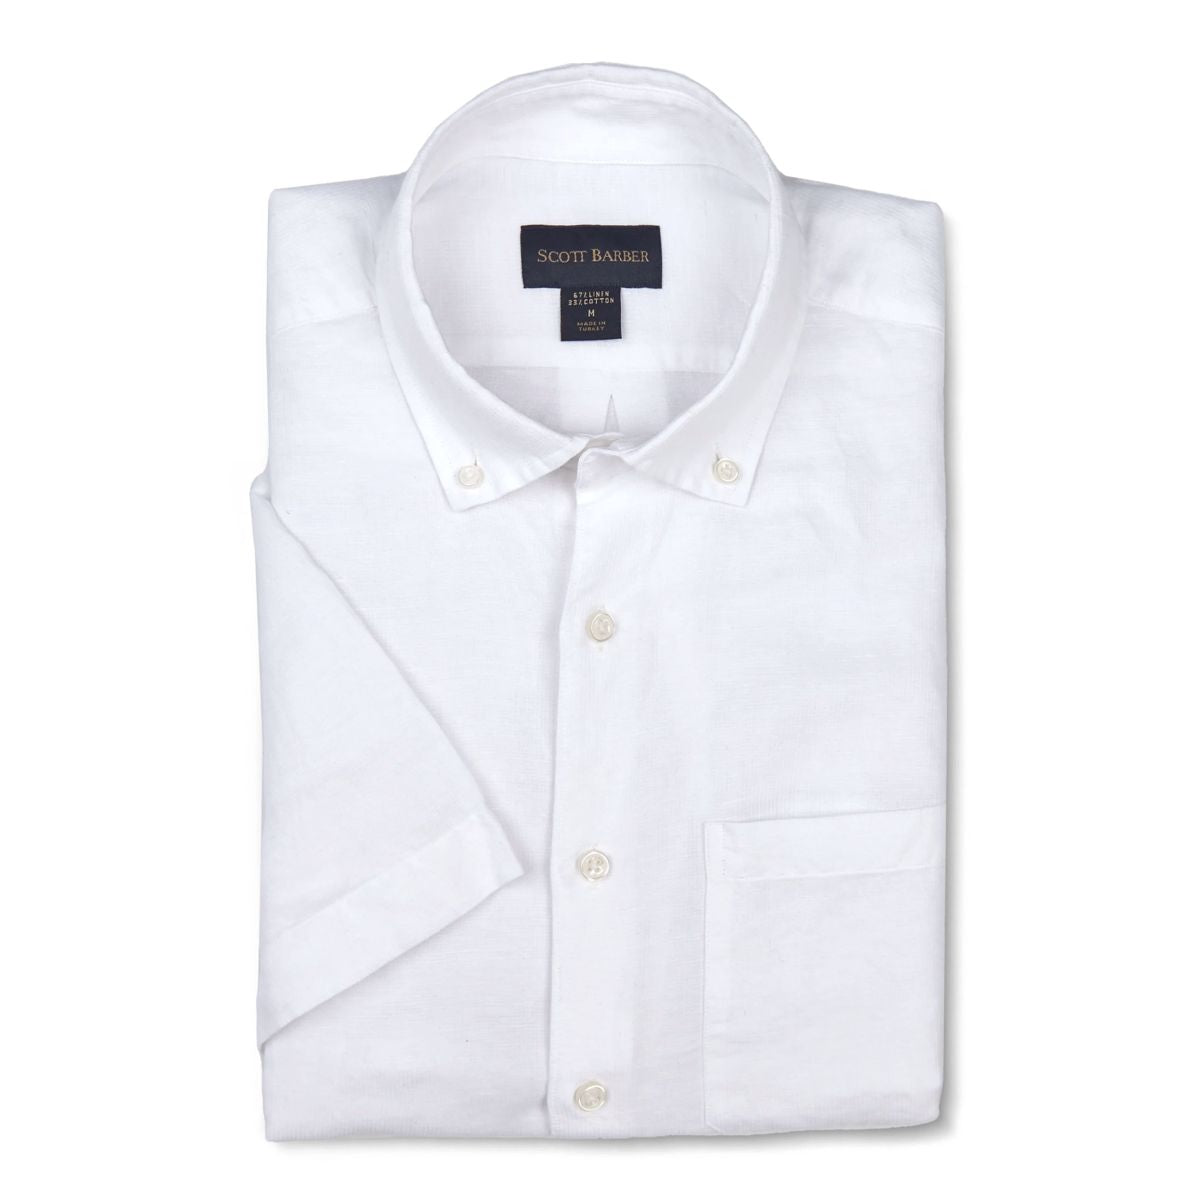 Linen and Cotton Barre Short Sleeve Sport Shirt in White by Scott Barber